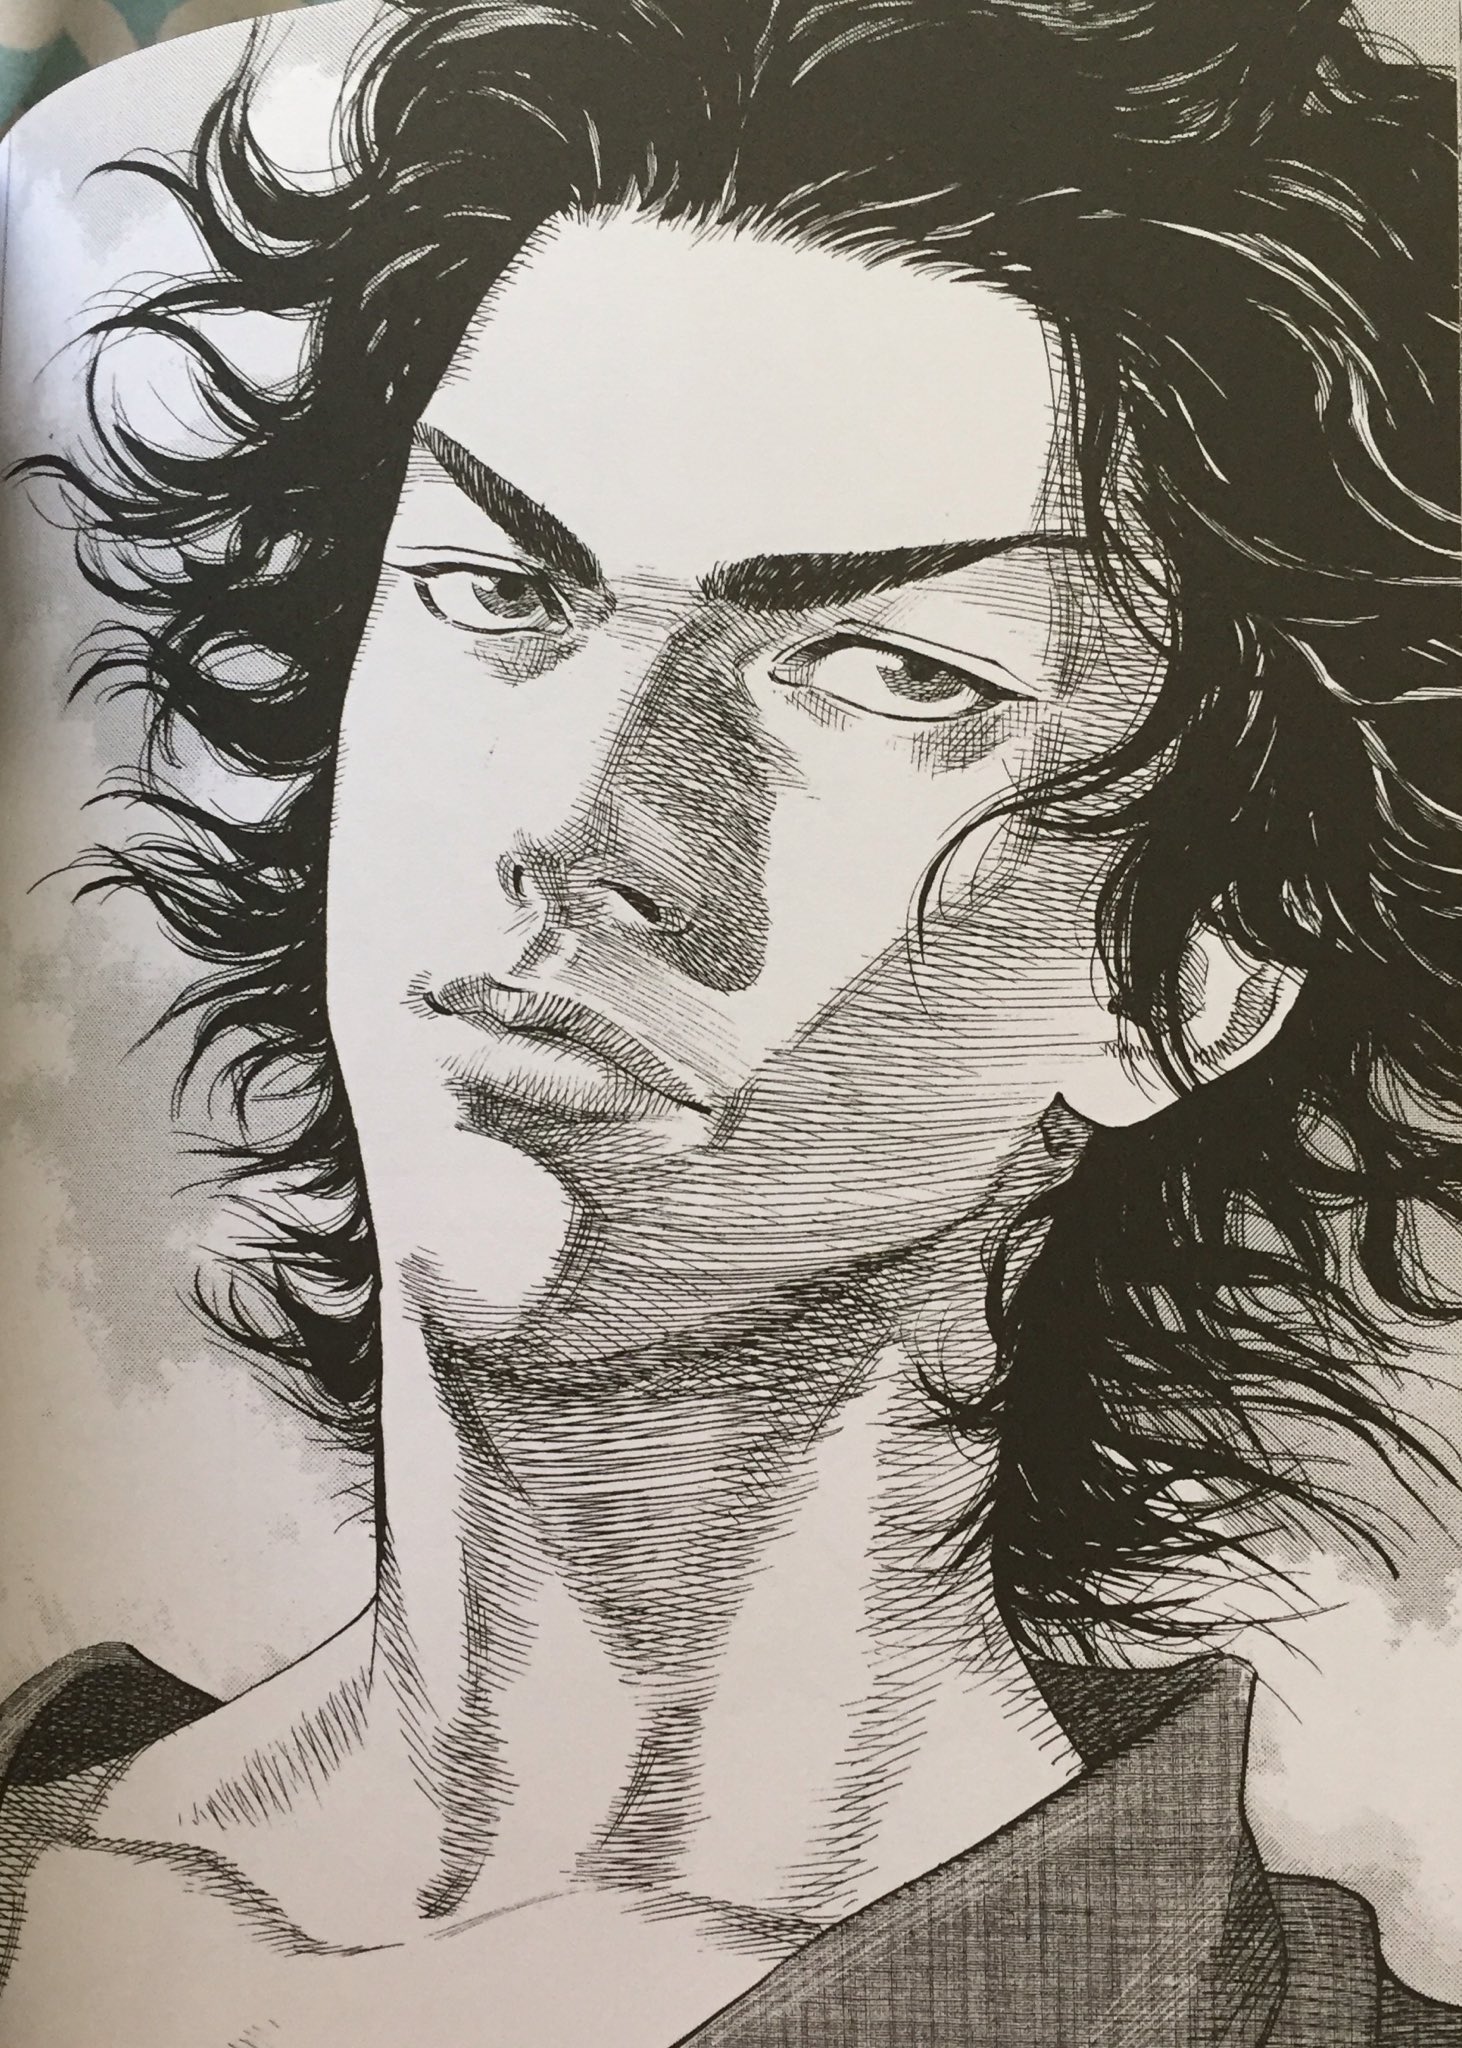 Minovsky on Twitter: "So going to be panel after panel of ridiculously handsome Musashi faces? Good manga. https://t.co/C5YIWJVKT8" / Twitter